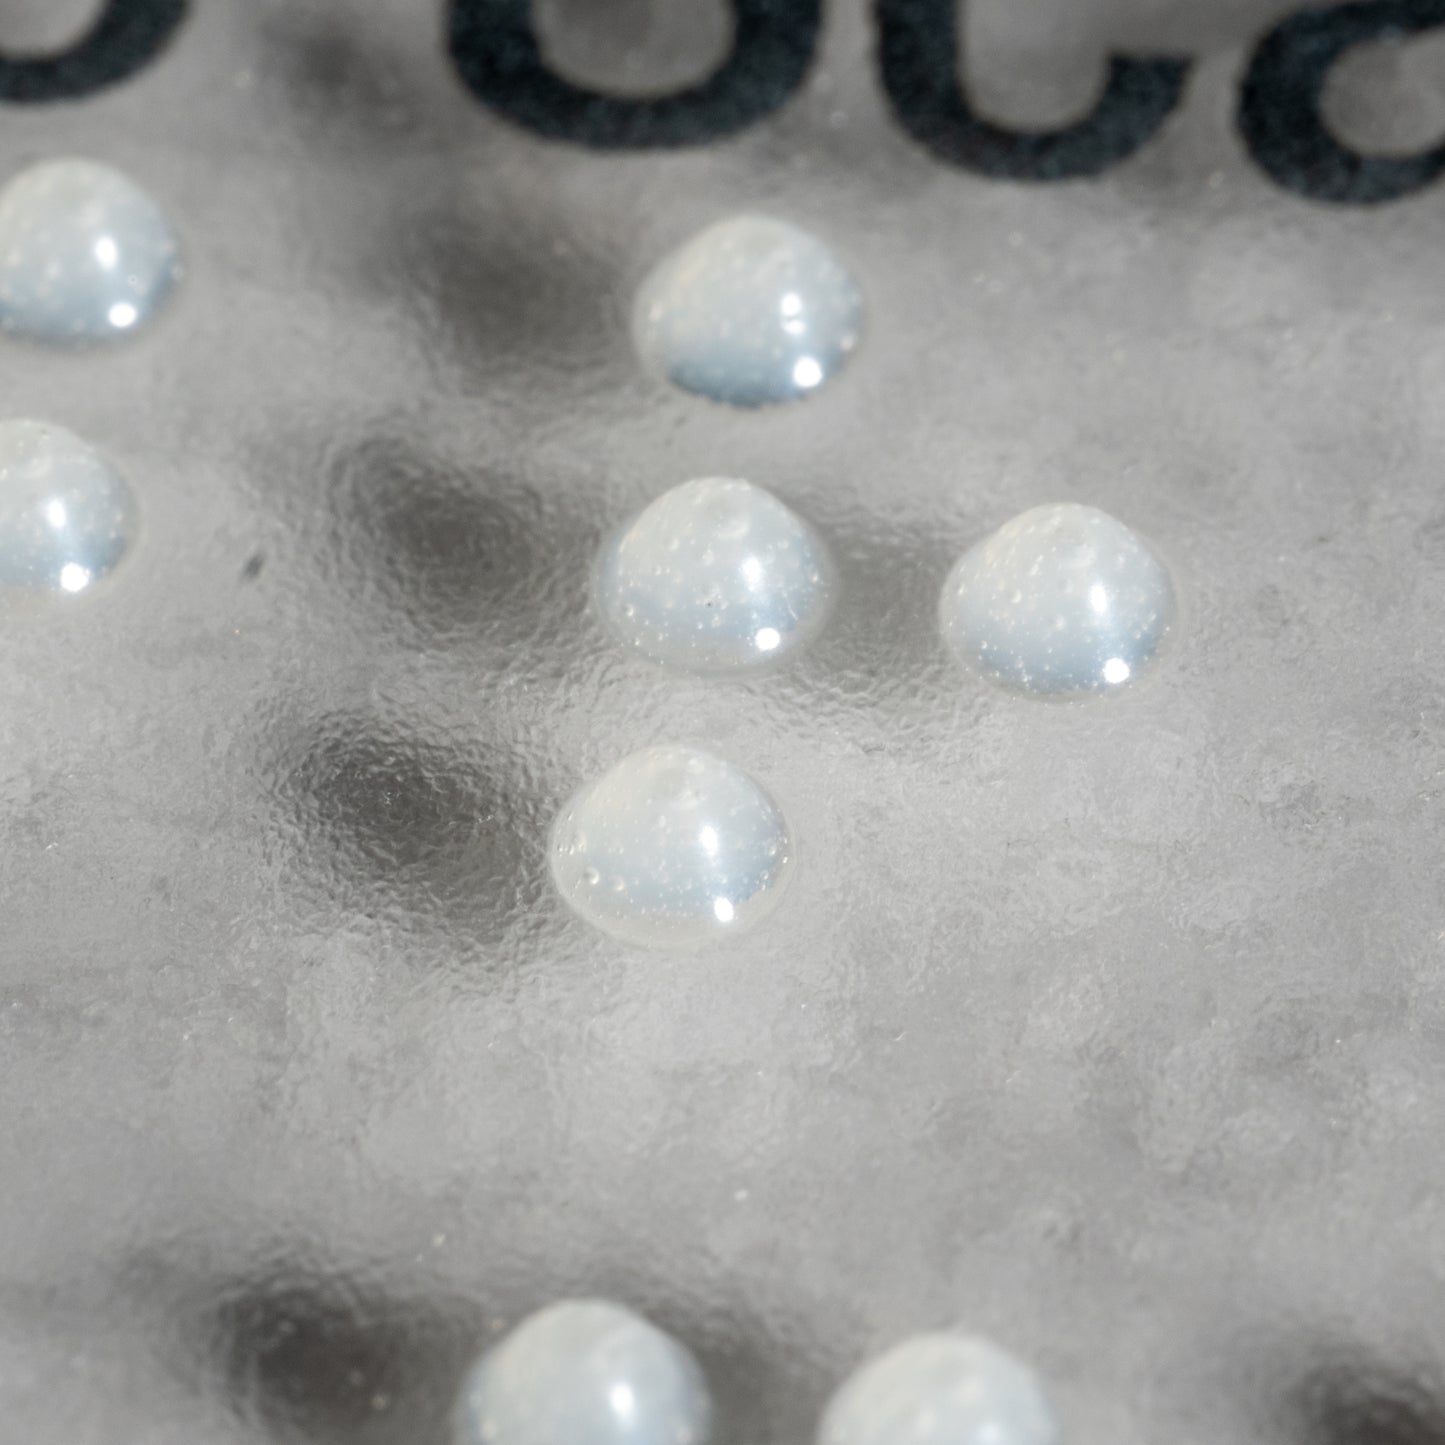 Up-close image of Braille.